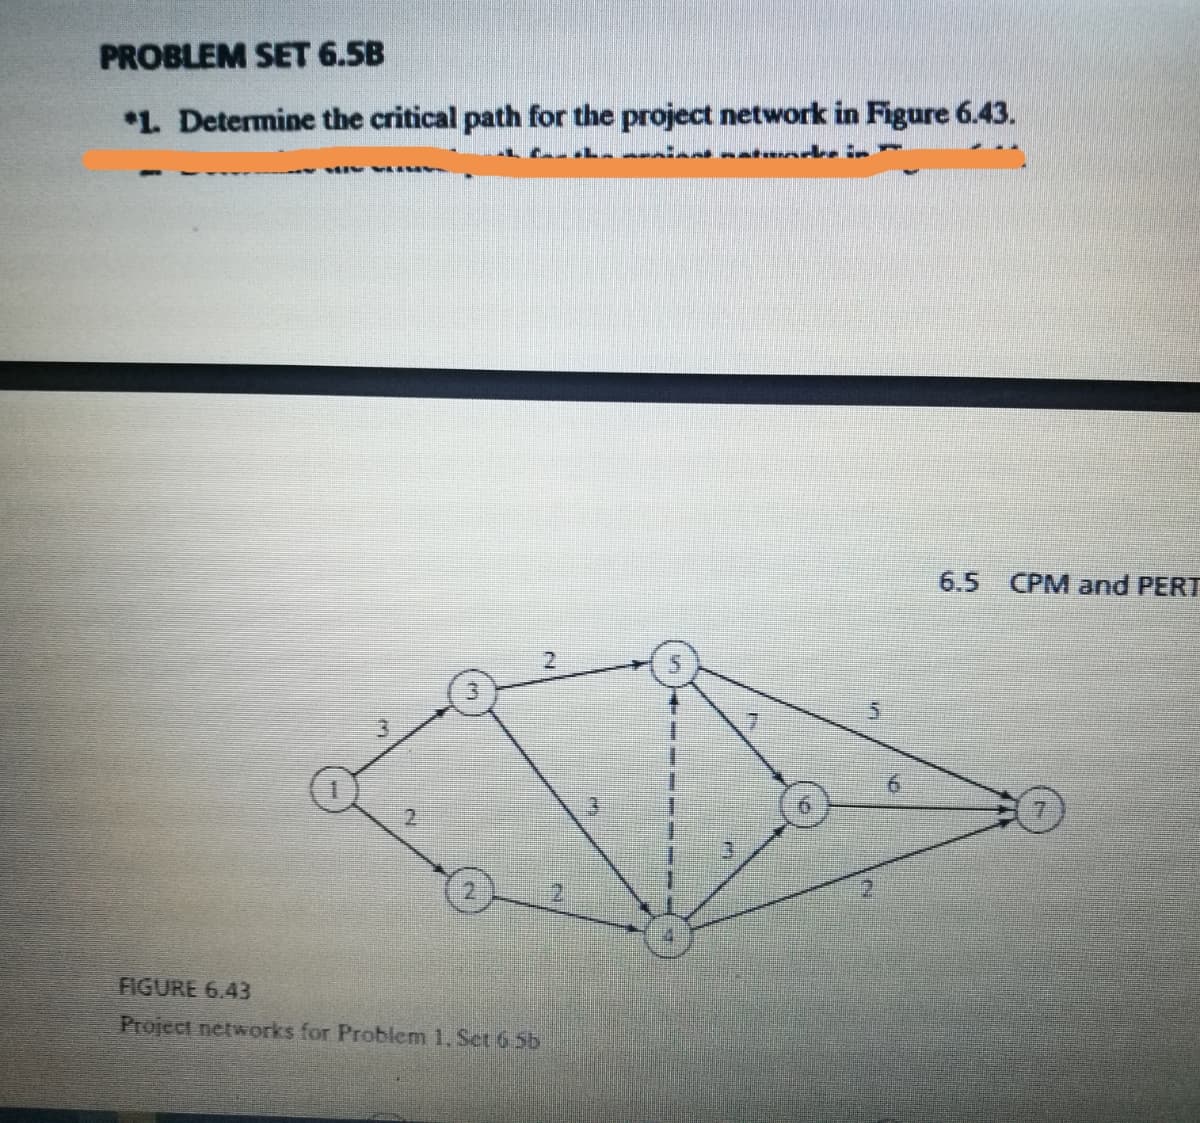 PROBLEM SET 6.5B
*1. Determine the critical path for the project network in Figure 6.43.
6.5 CPM and PERT
3.
FIGURE 6.43
Project networks for Problem 1, Set 6 5b
